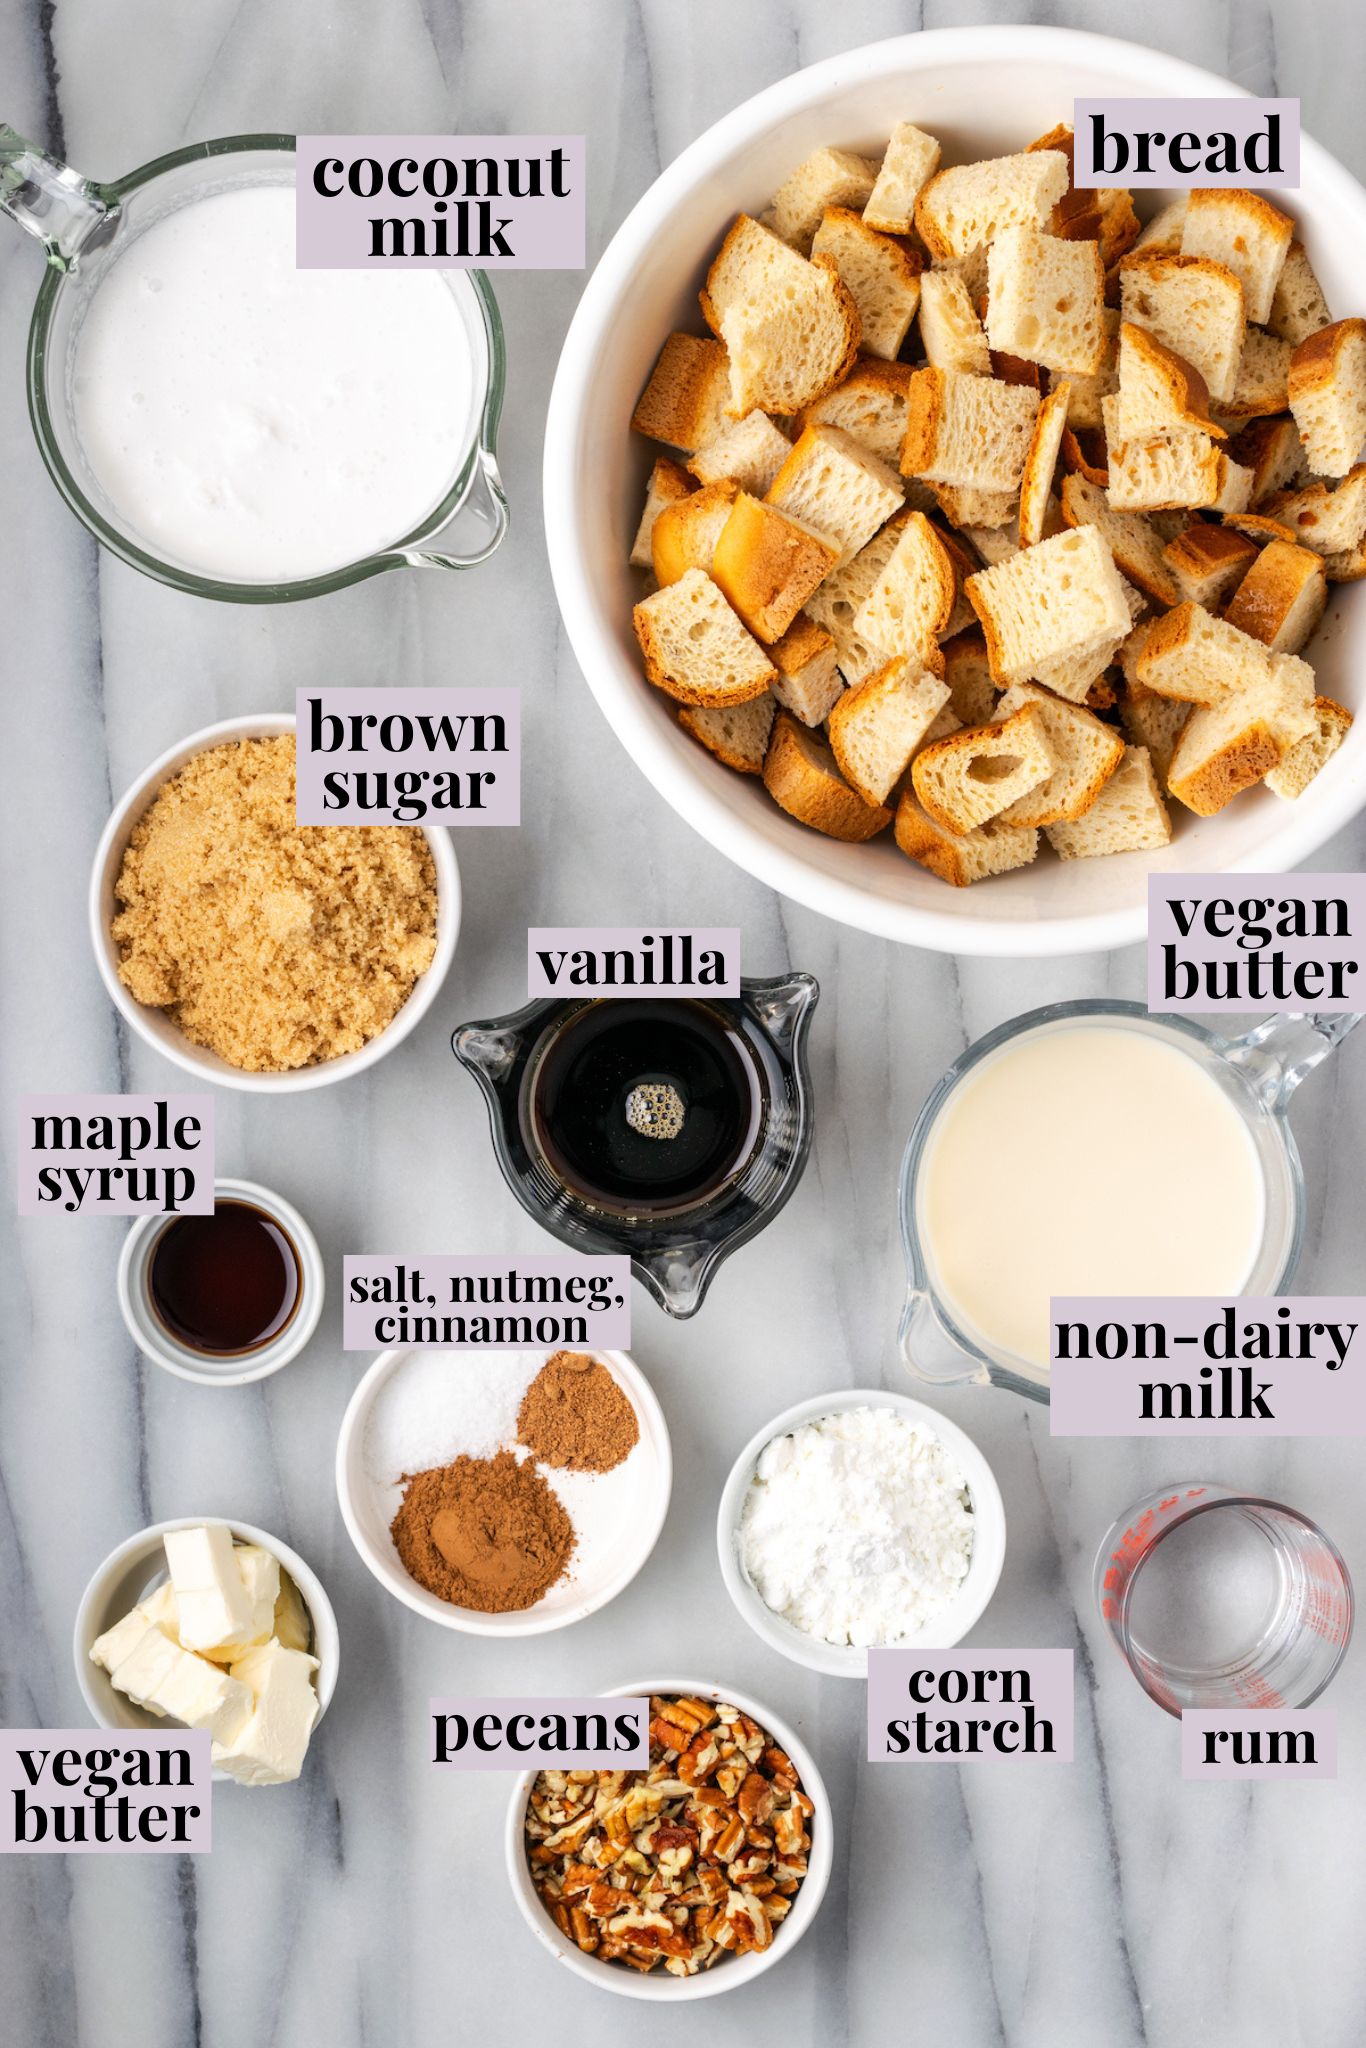 Overhead view of bread pudding ingredients with labels